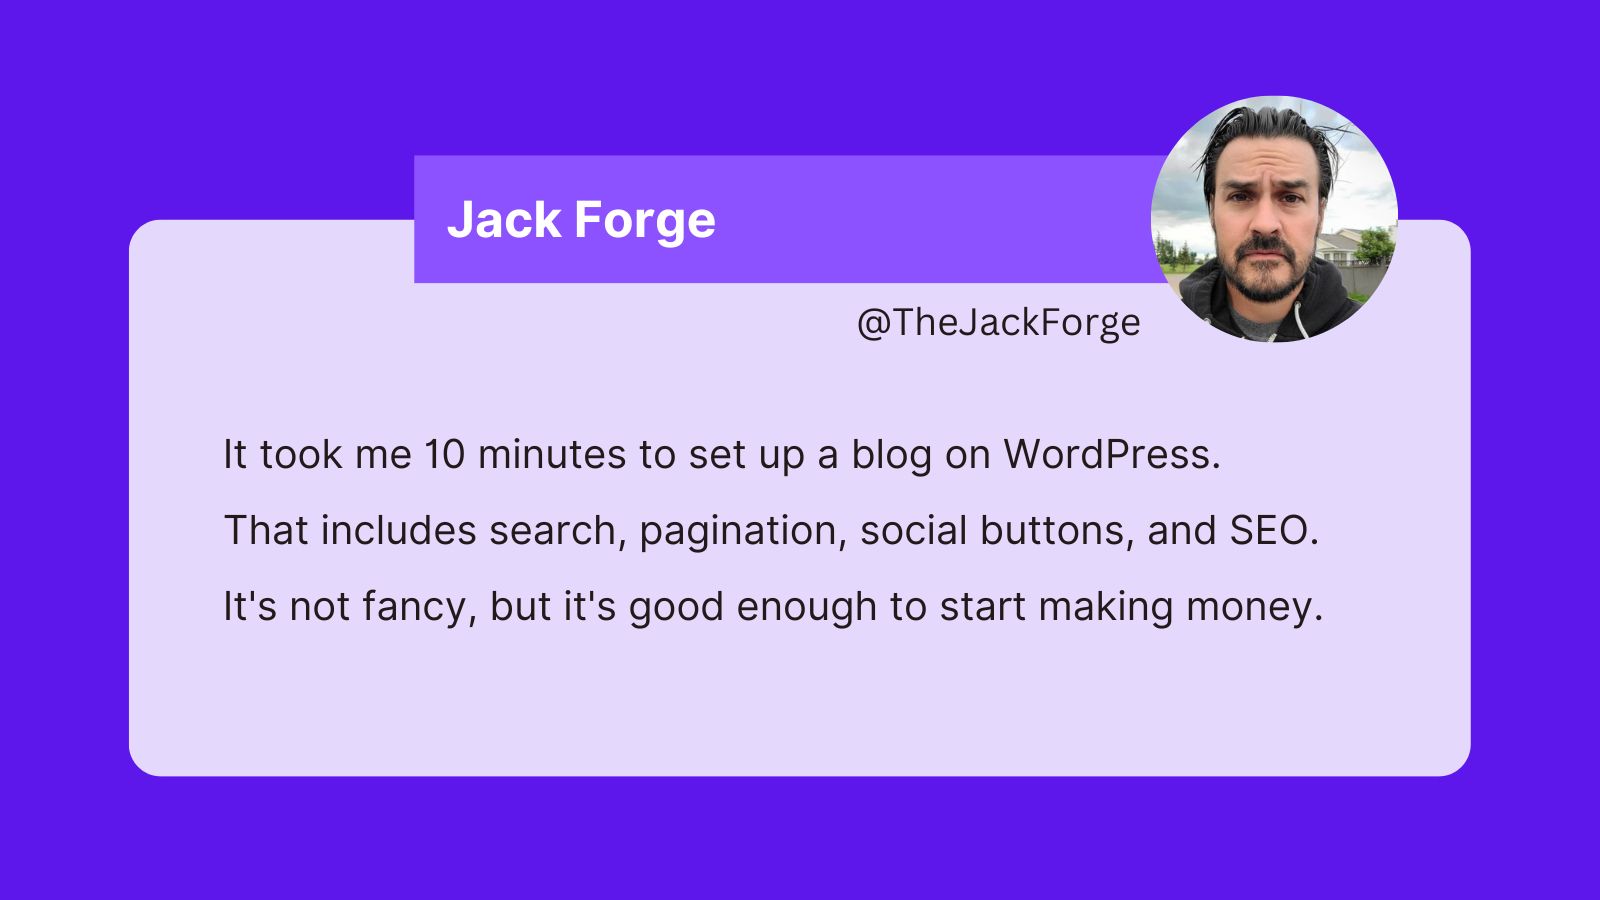 A tweet from Jack Forge that reads: It took me 10 minutes to set up a blog on WordPress.  That includes search, pagination, social buttons, and SEO.  It's not fancy, but it's good enough to start making money.